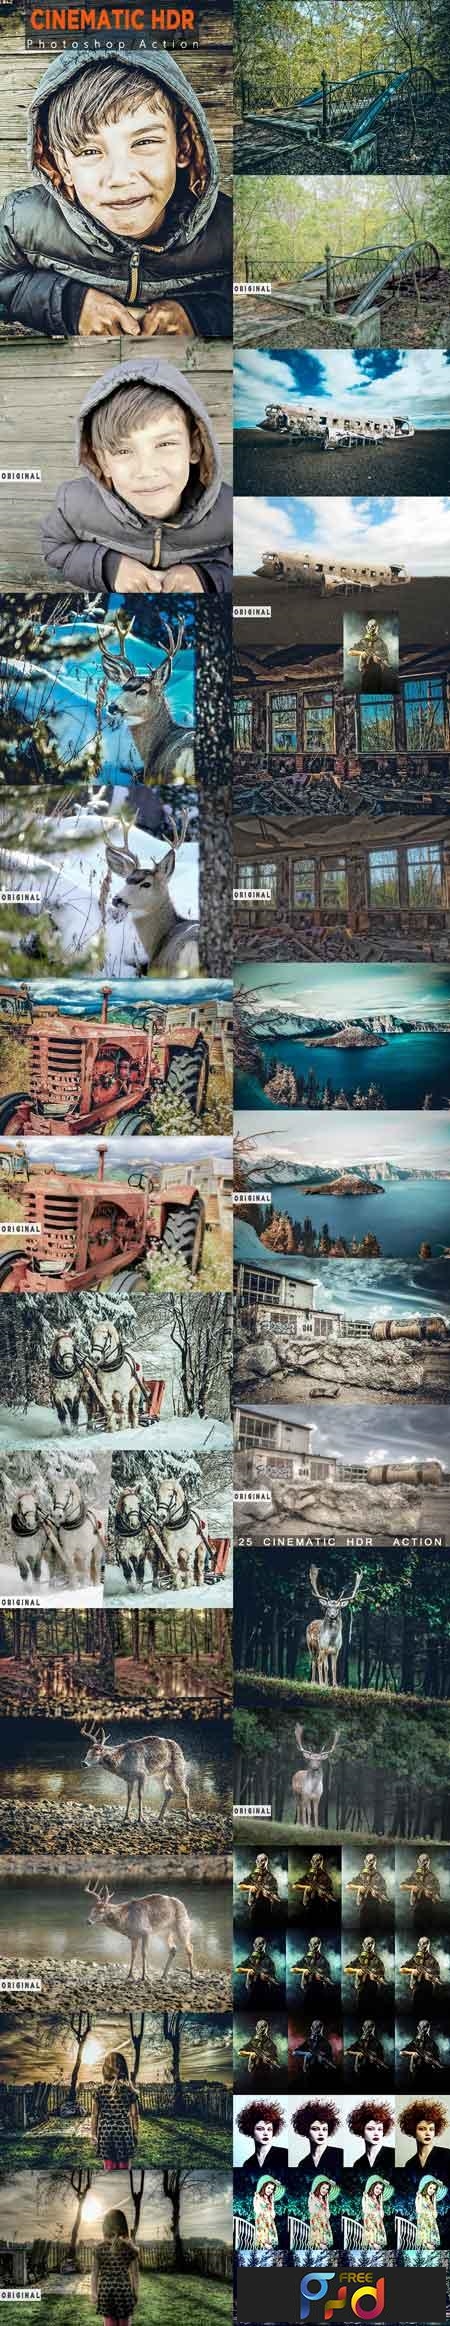 Cinematic HDR Photoshop Action